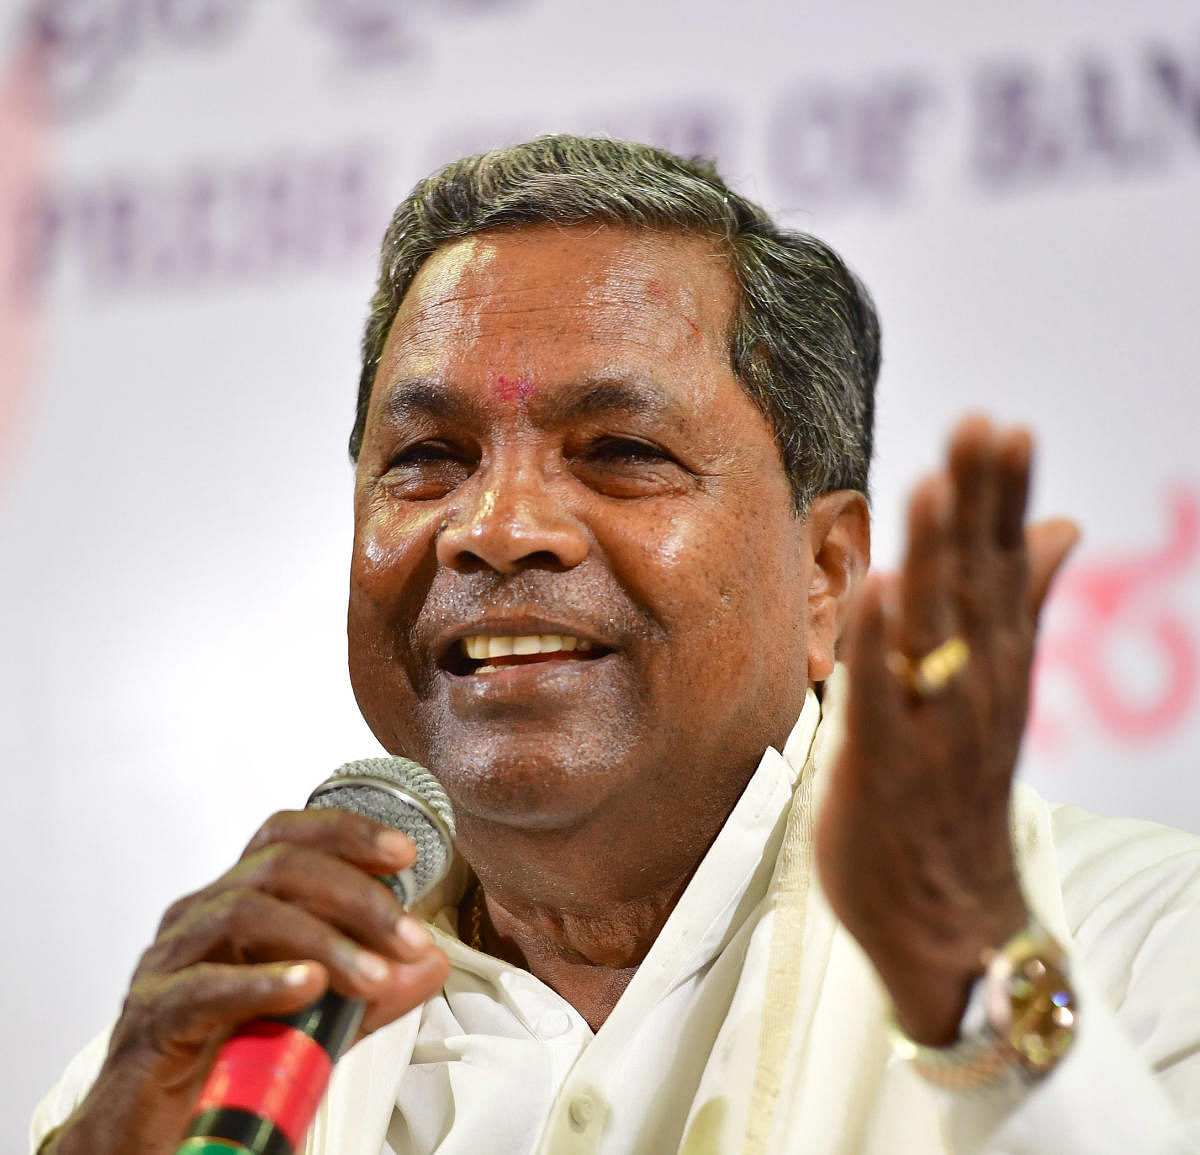 “Discussion is going on between both the parties. We will resolve it amicably”, Siddaramaiah said. File photo